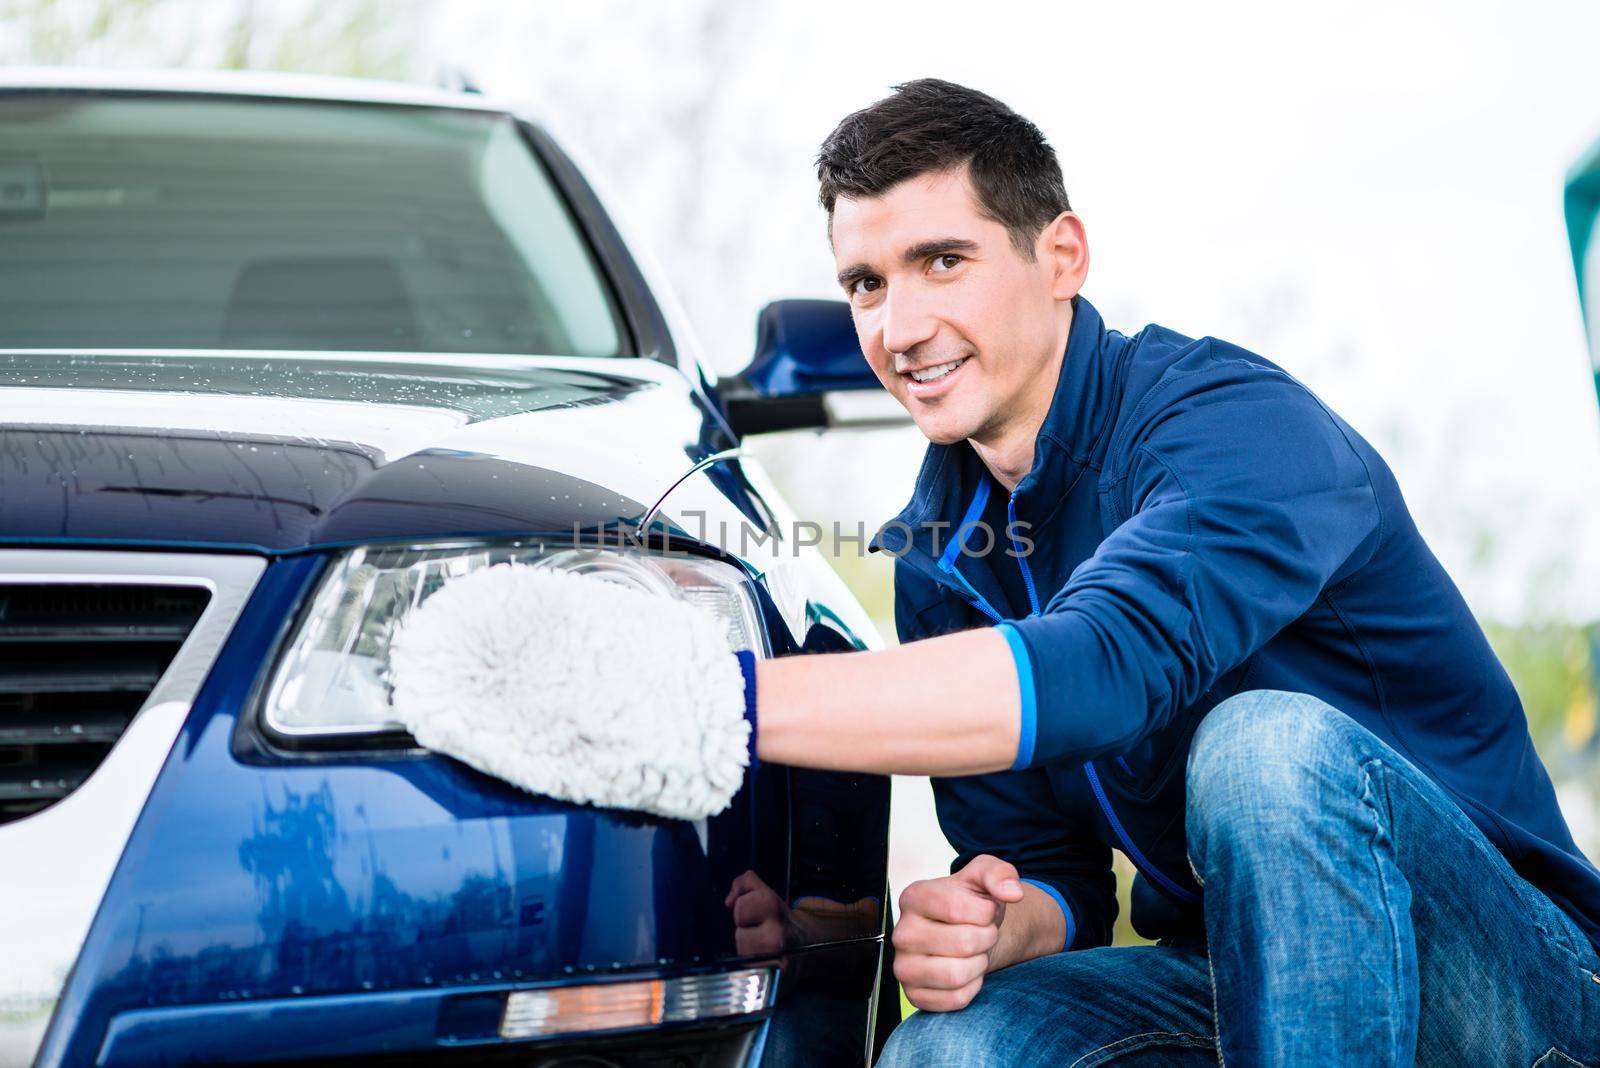 Smiling man cleaning the headlamp on his car wiping it with a mitt as he crouches alongside the vehicle